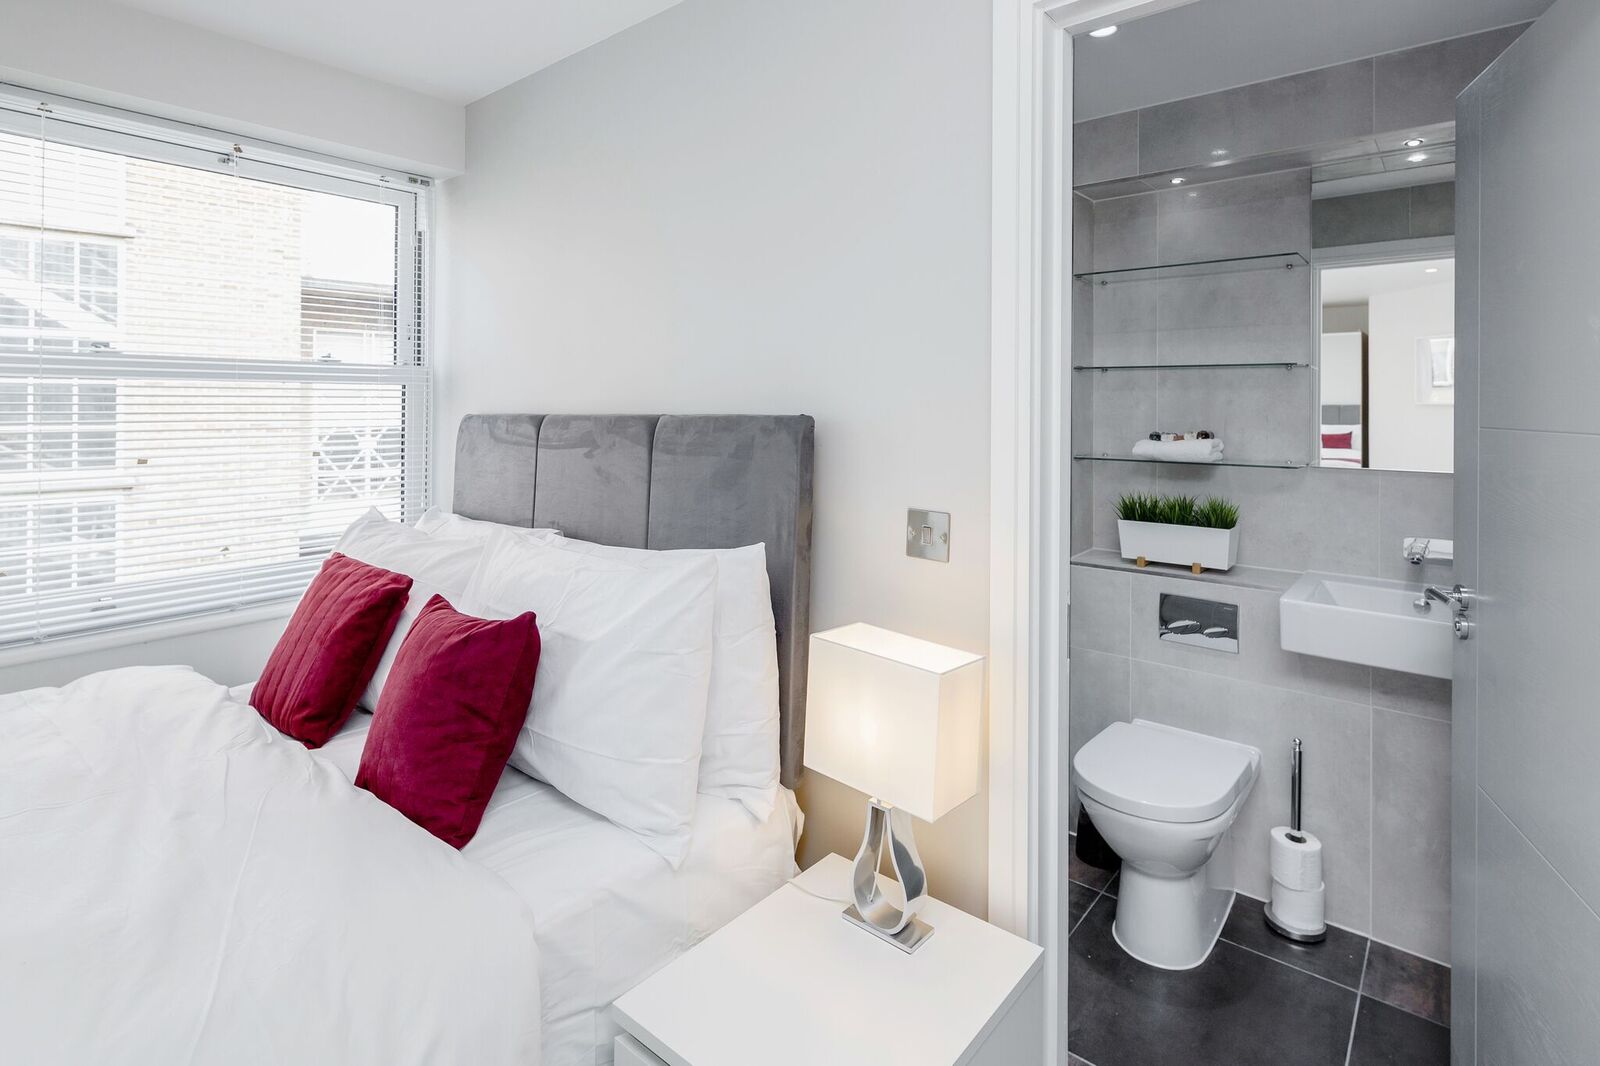 Ealing-Serviced-Apartments-London-|-West-London-Short-Let-Accommodation-| Self-catering-|-Cheap-Corporate-Housing-|-Luxury-Short-Lets-London-|-BOOK-NOW-Urban-Stay